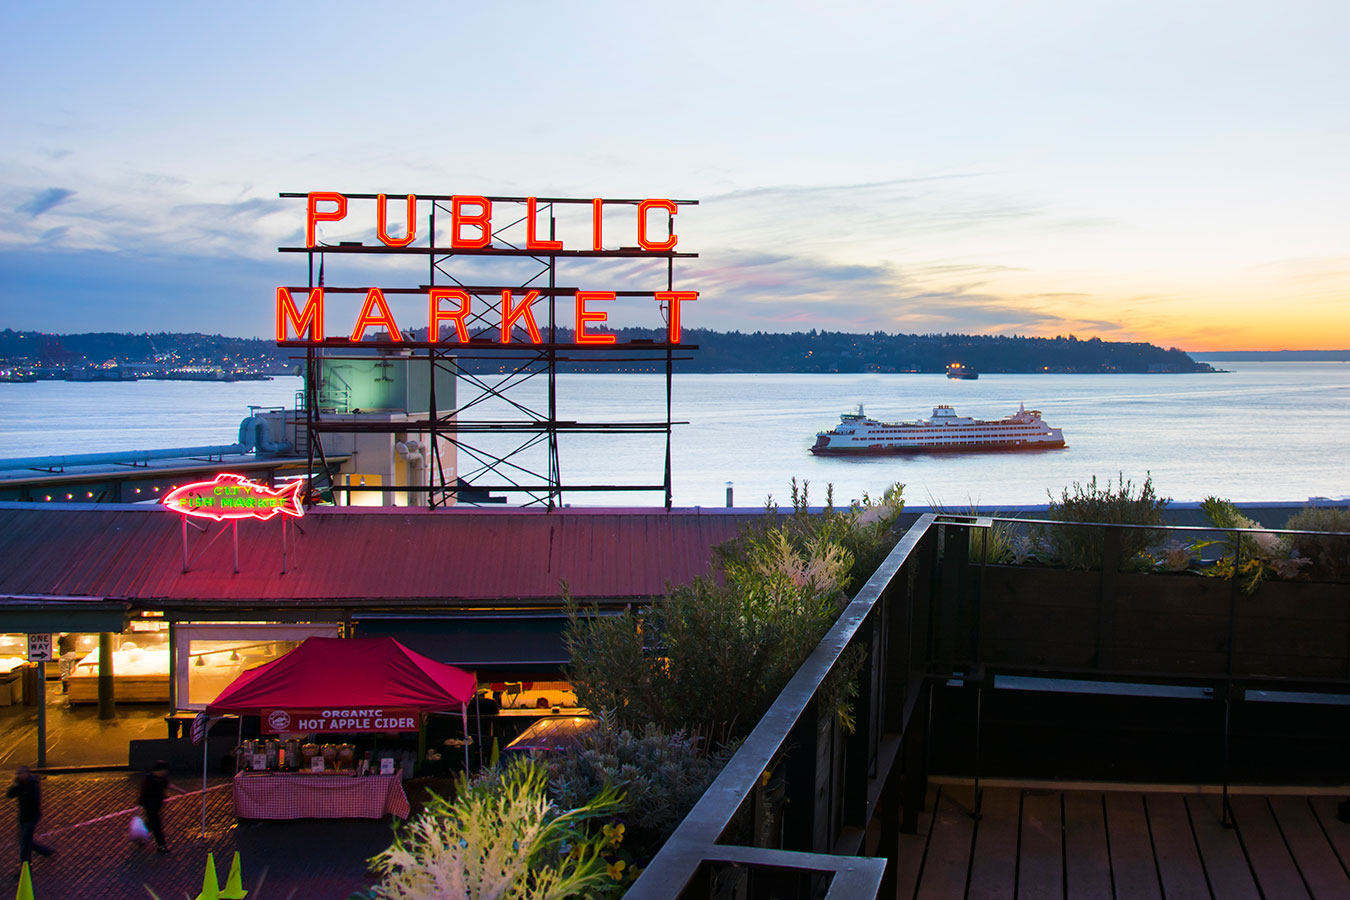 Views from Inn at the Market are spectacular - whether you enjoy them from your room or from the large outdoor terrace overlooking Elliott Bay. Photo Courtesy of the Inn at the Market.